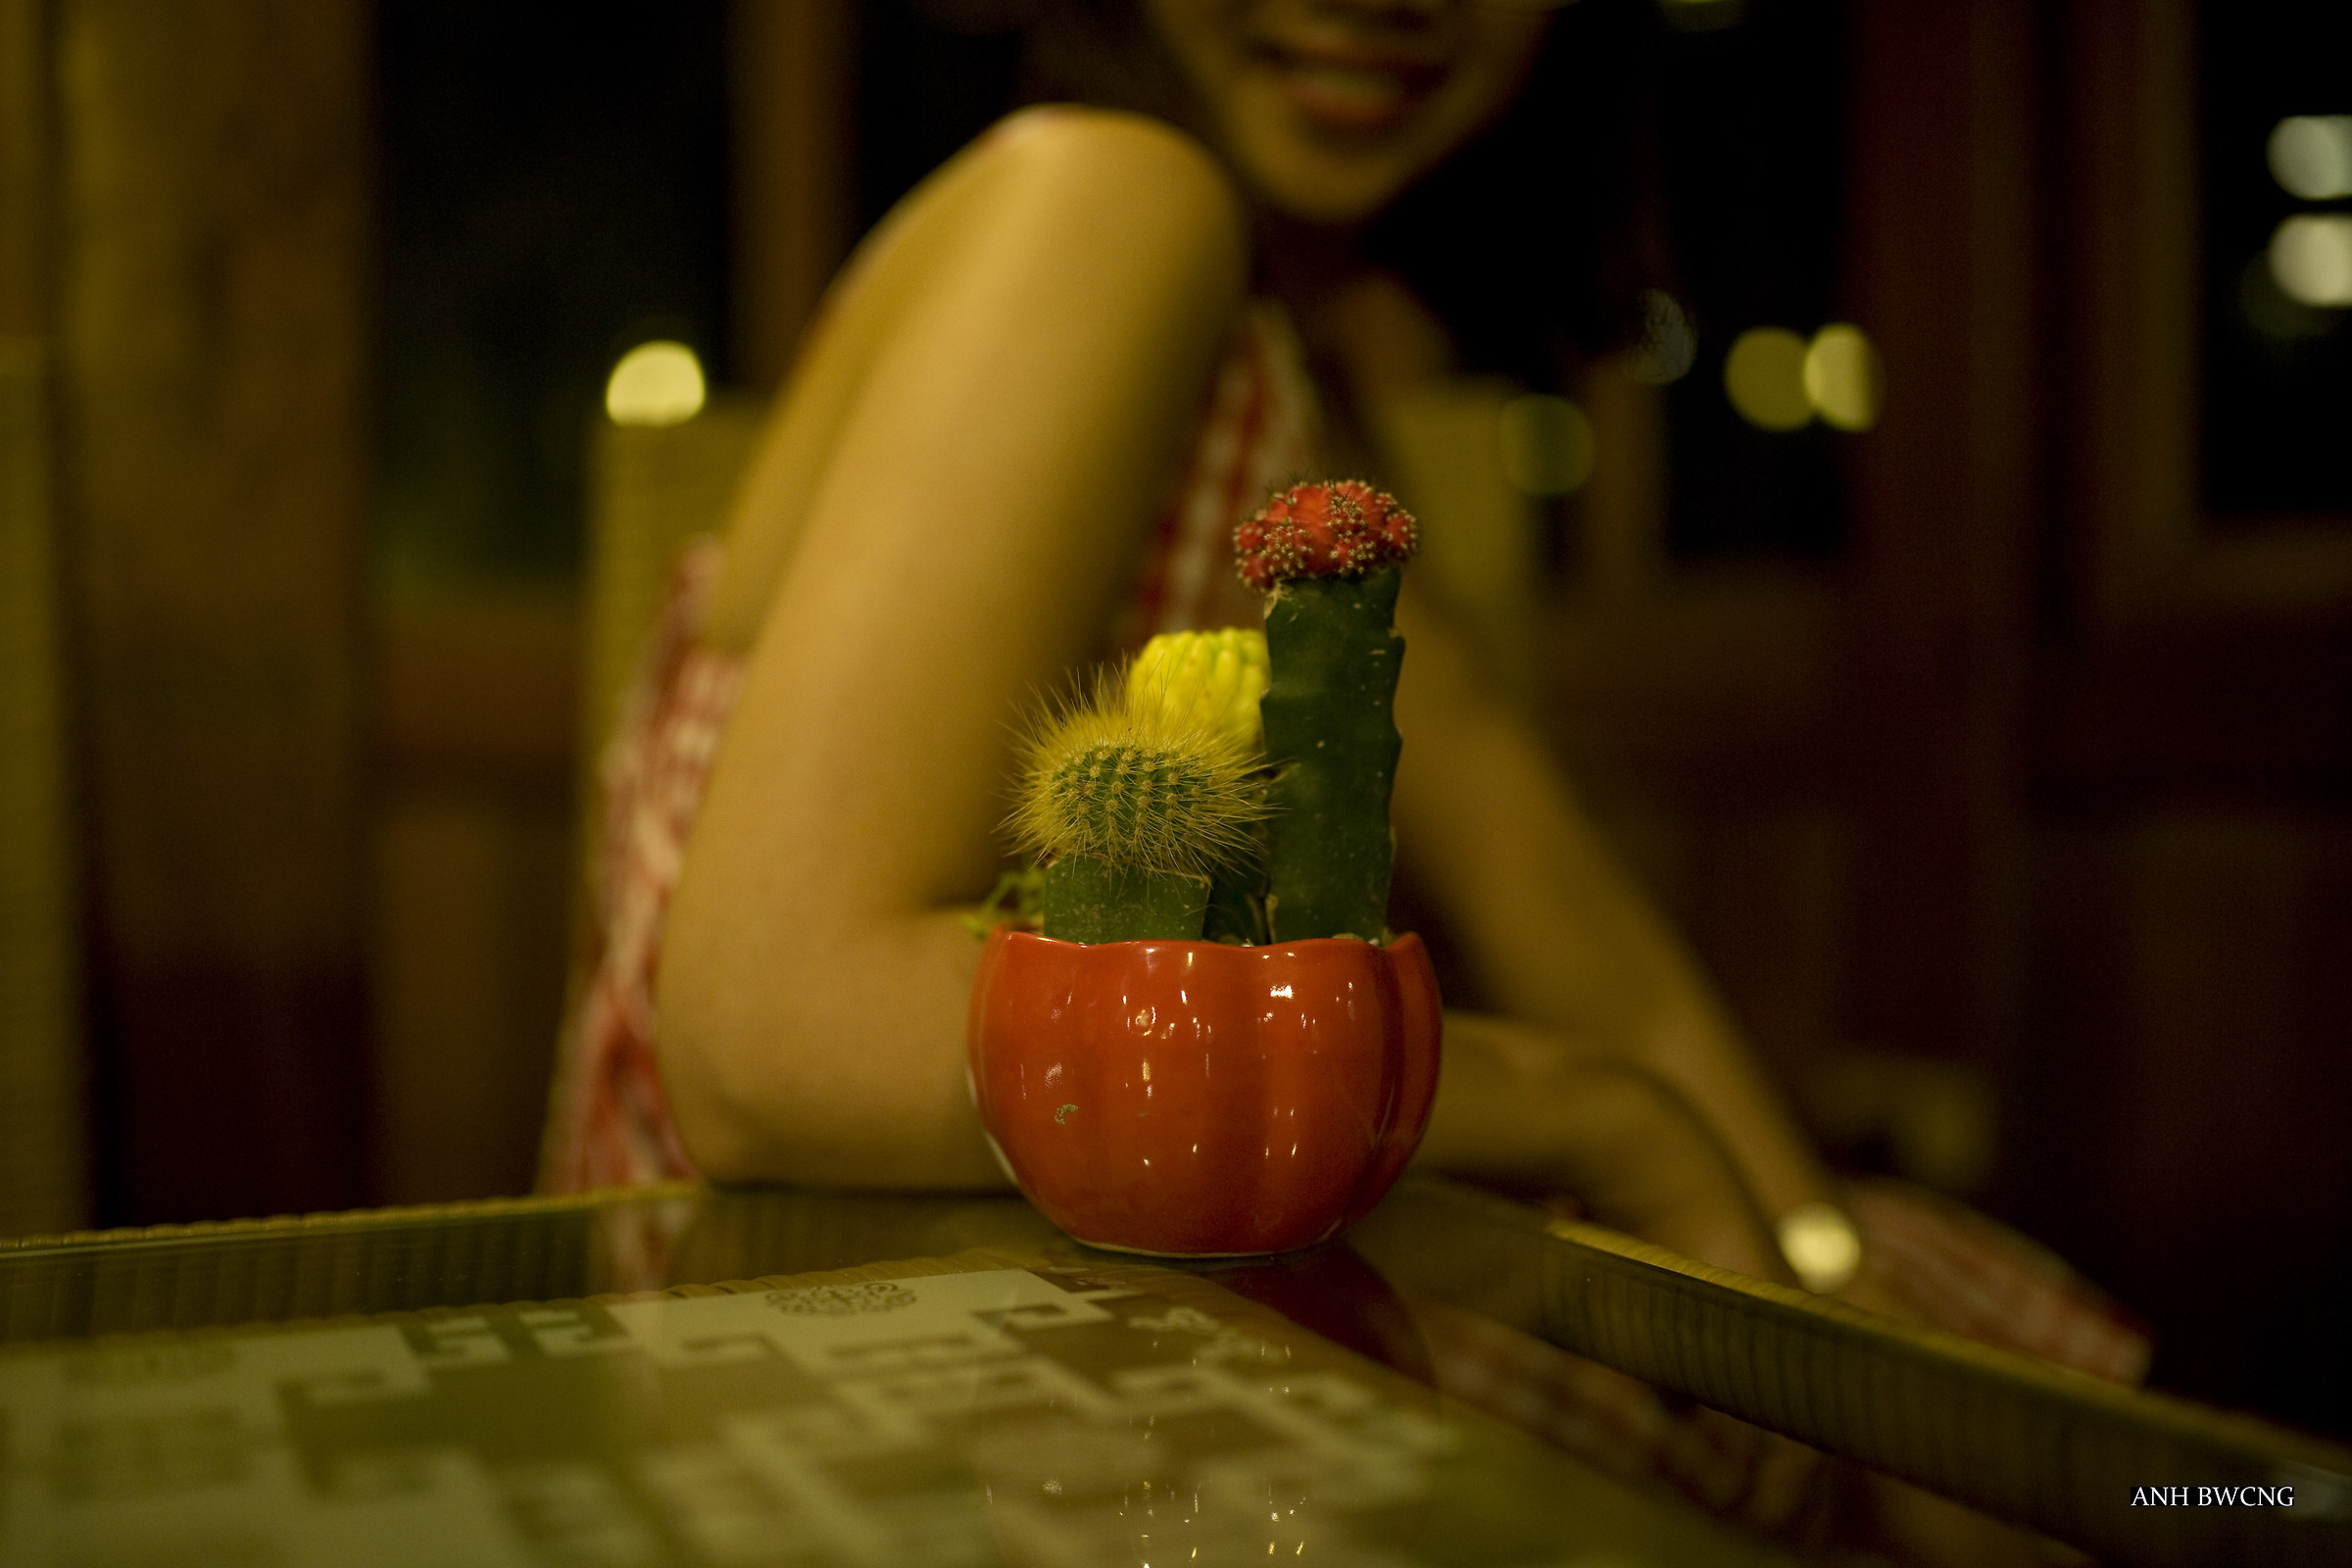 Woman Beside The Cactus...